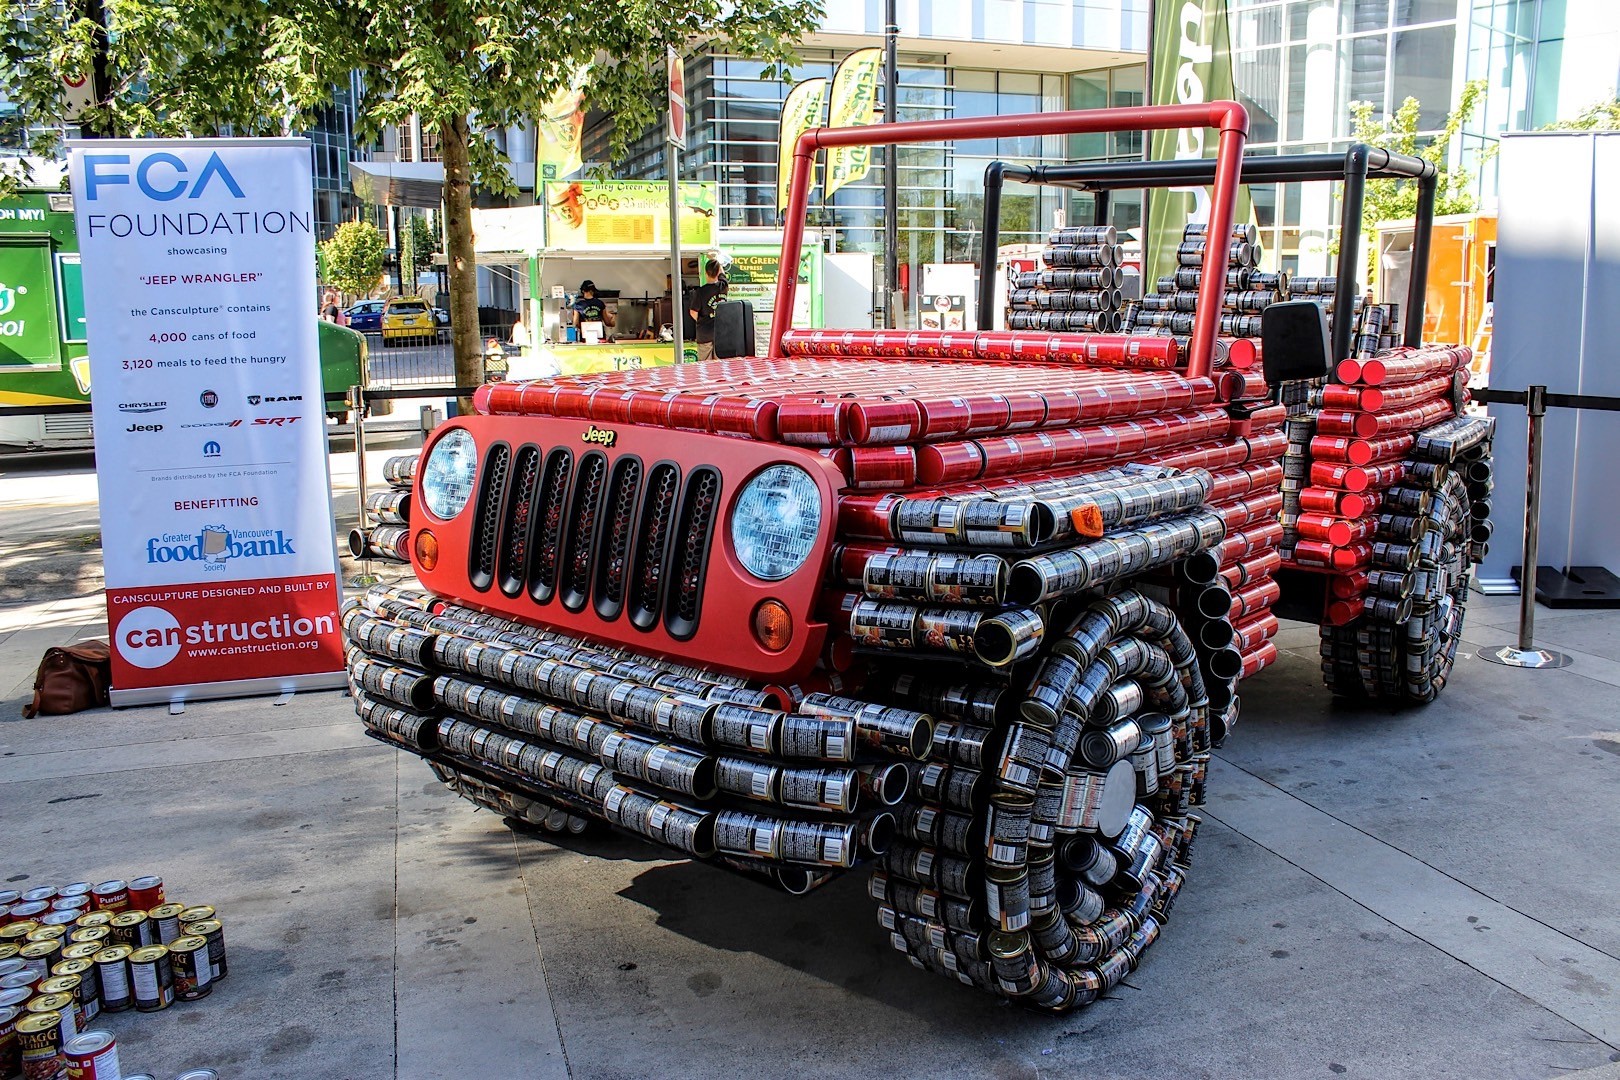 food-cans-made-jeep-wrangler-looks-like-tin-man-s-ride-we-applaud-the-idea-photo-gallery_9